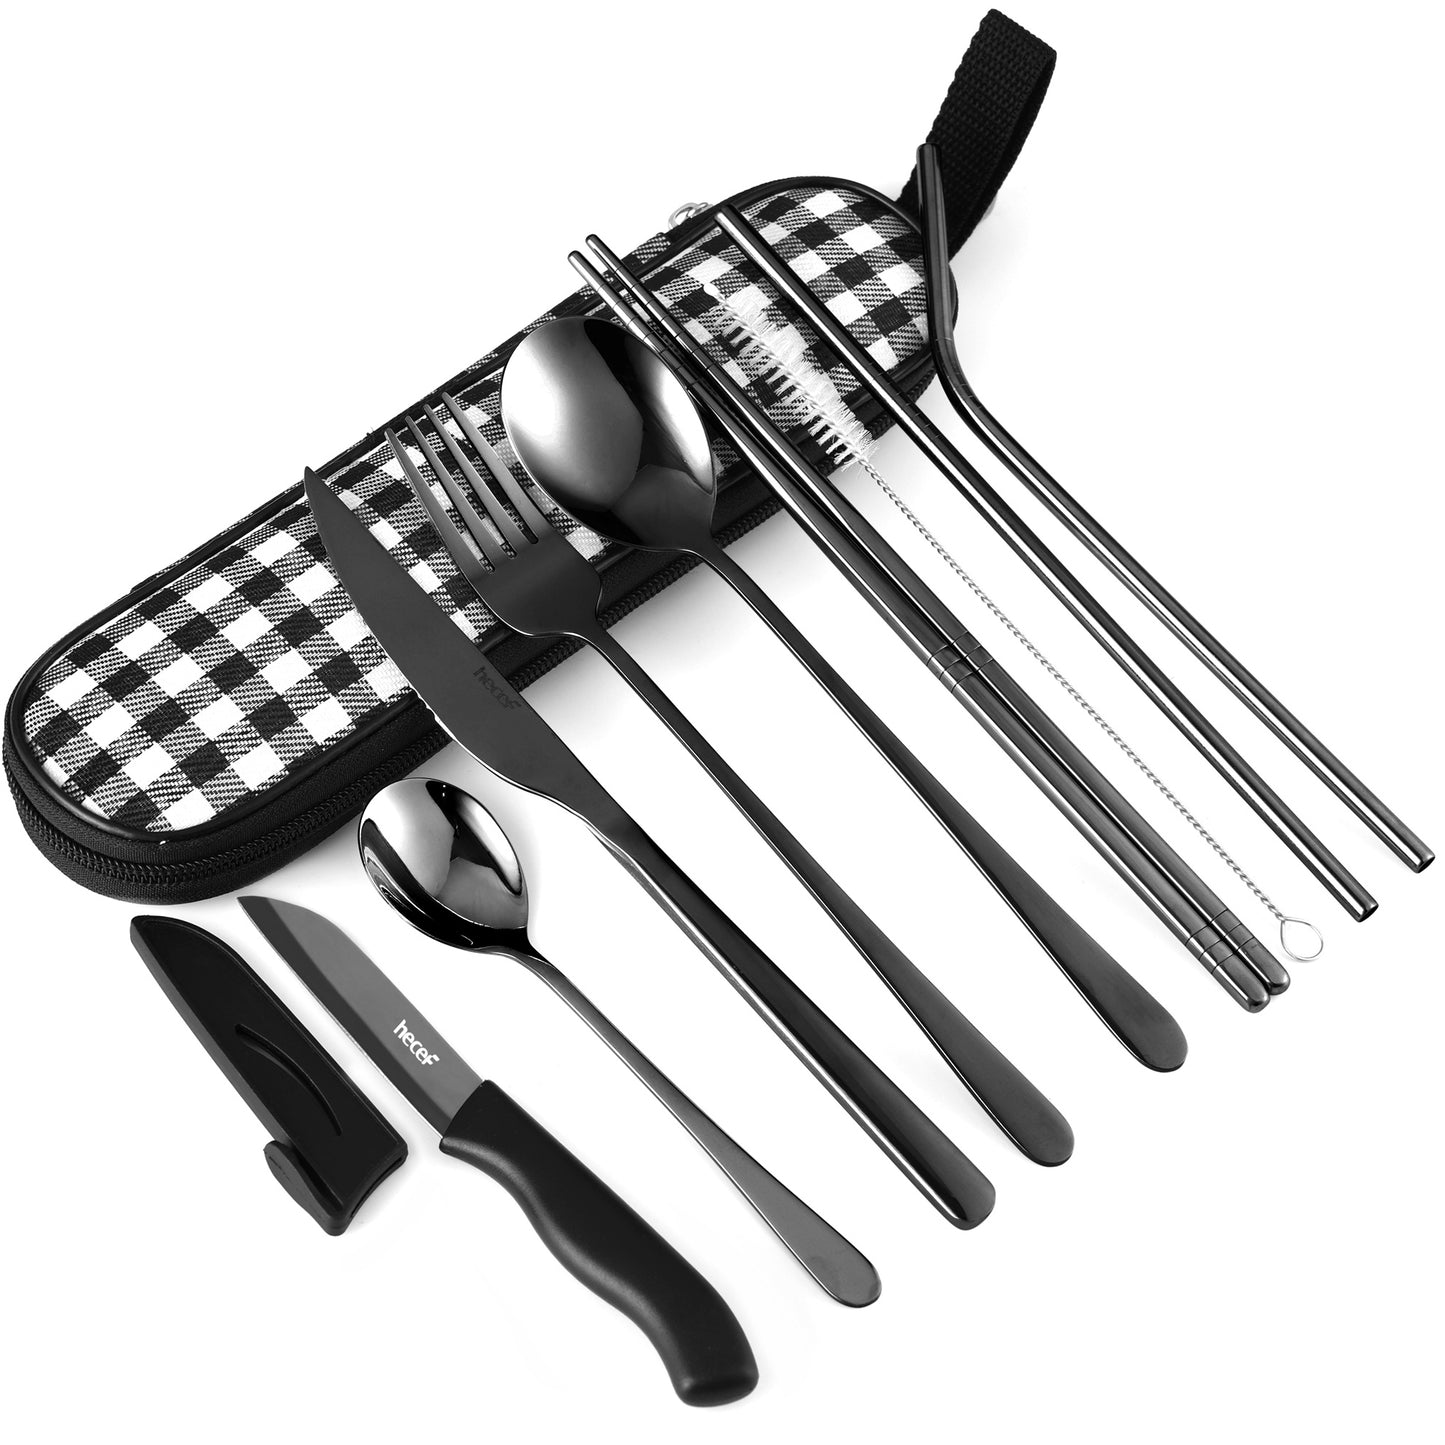 Hecef 11 PCS Black Titanium Plating Portable Utensils, Reusable Travel Cutlery Set with Compact Carrying Case & Mesh Bag, 18/0 Stainless Steel Handy Flatware Set for Work, School, Camping - Hecef Kitchen